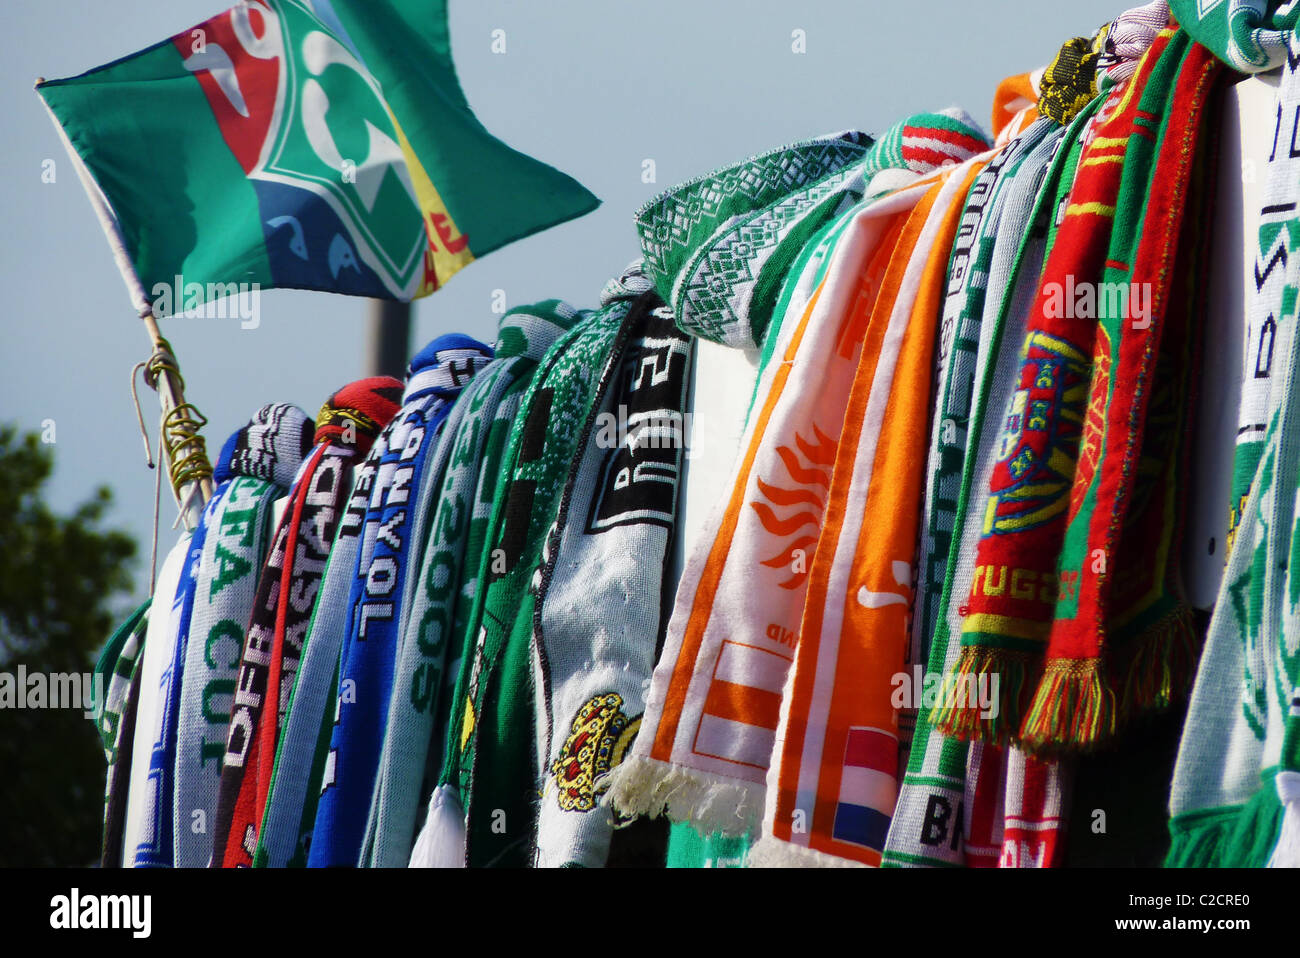 Several football scarves and a flag of Werder Bremen - Bremen, Germany Stock Photo